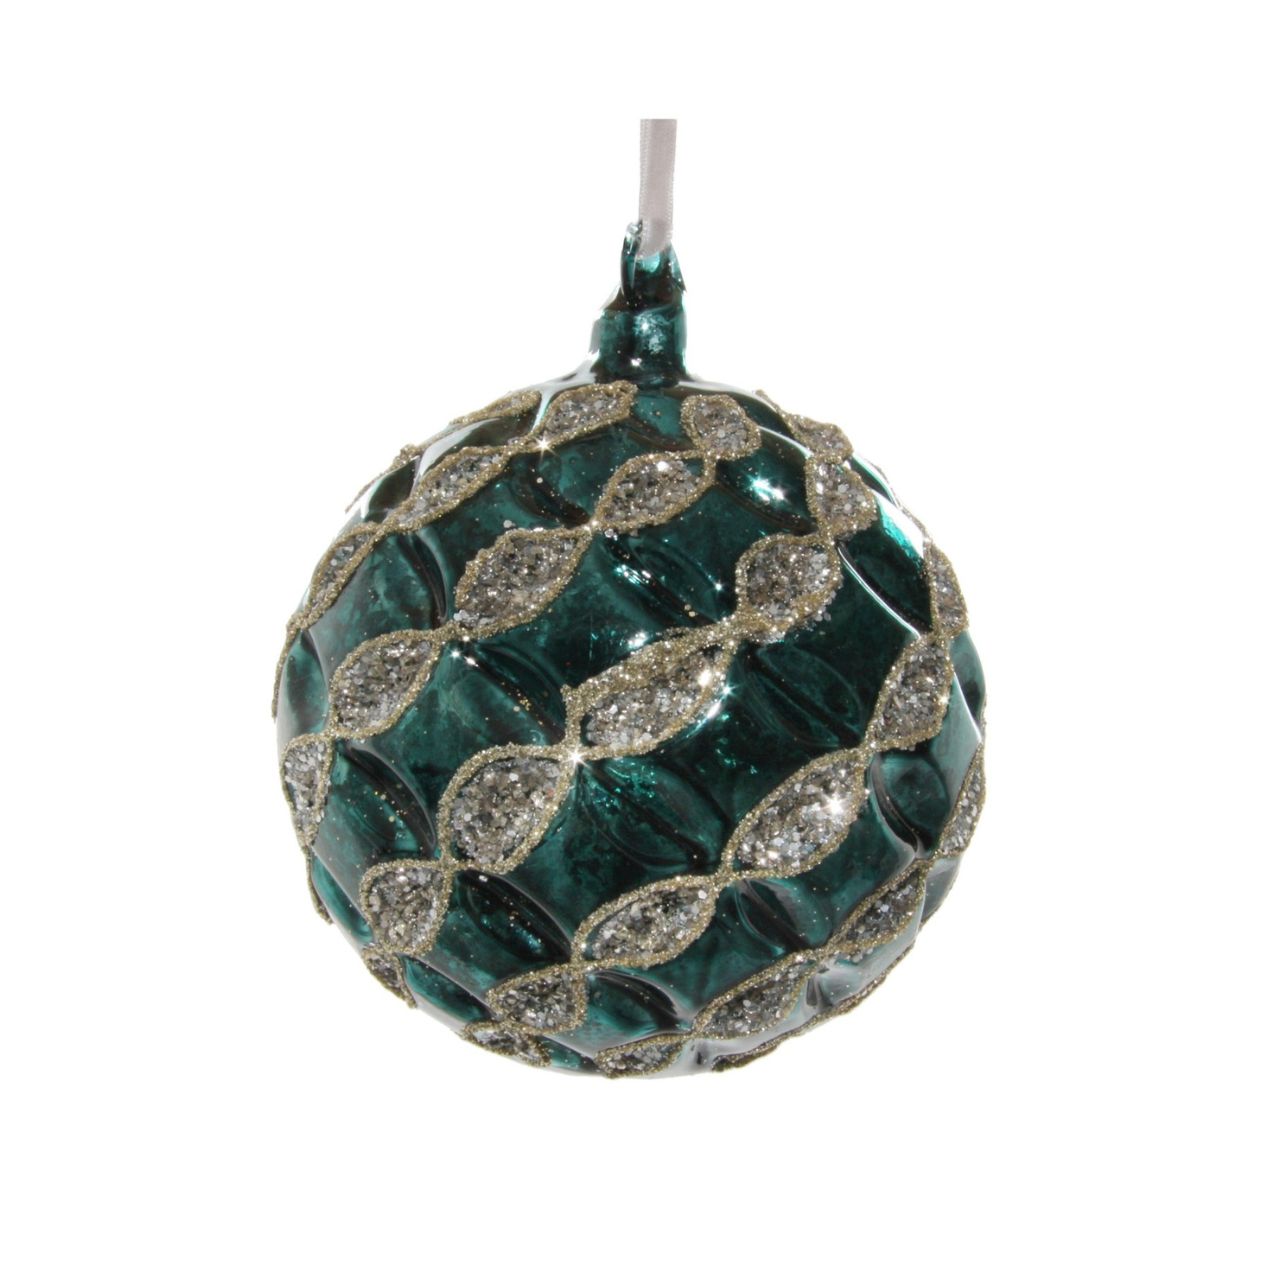 Shishi Blue-green Glass Antique Ball Silver Glitter Diagonals  Browse our beautiful range of luxury festive Christmas tree decorations, baubles & ornaments for your tree this Christmas.